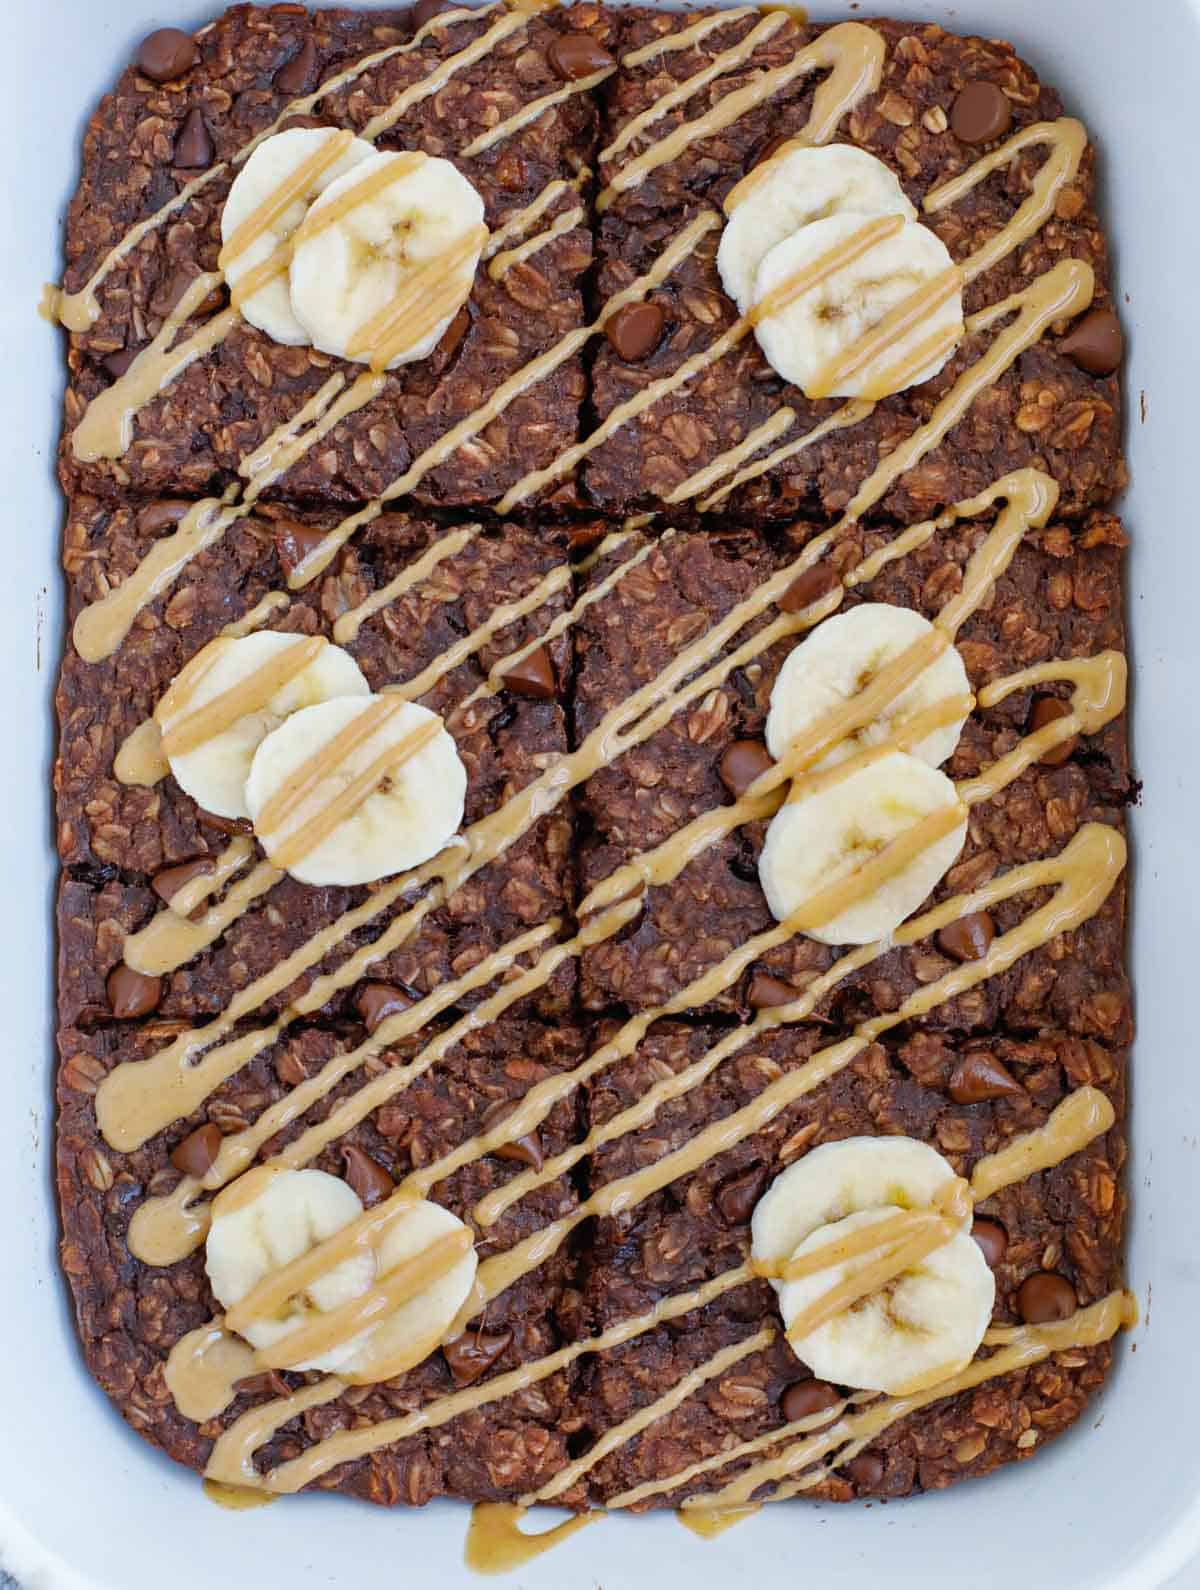 chocolate baked oats after baking, topped with fresh slices of banana and drizzle of peanut butter.